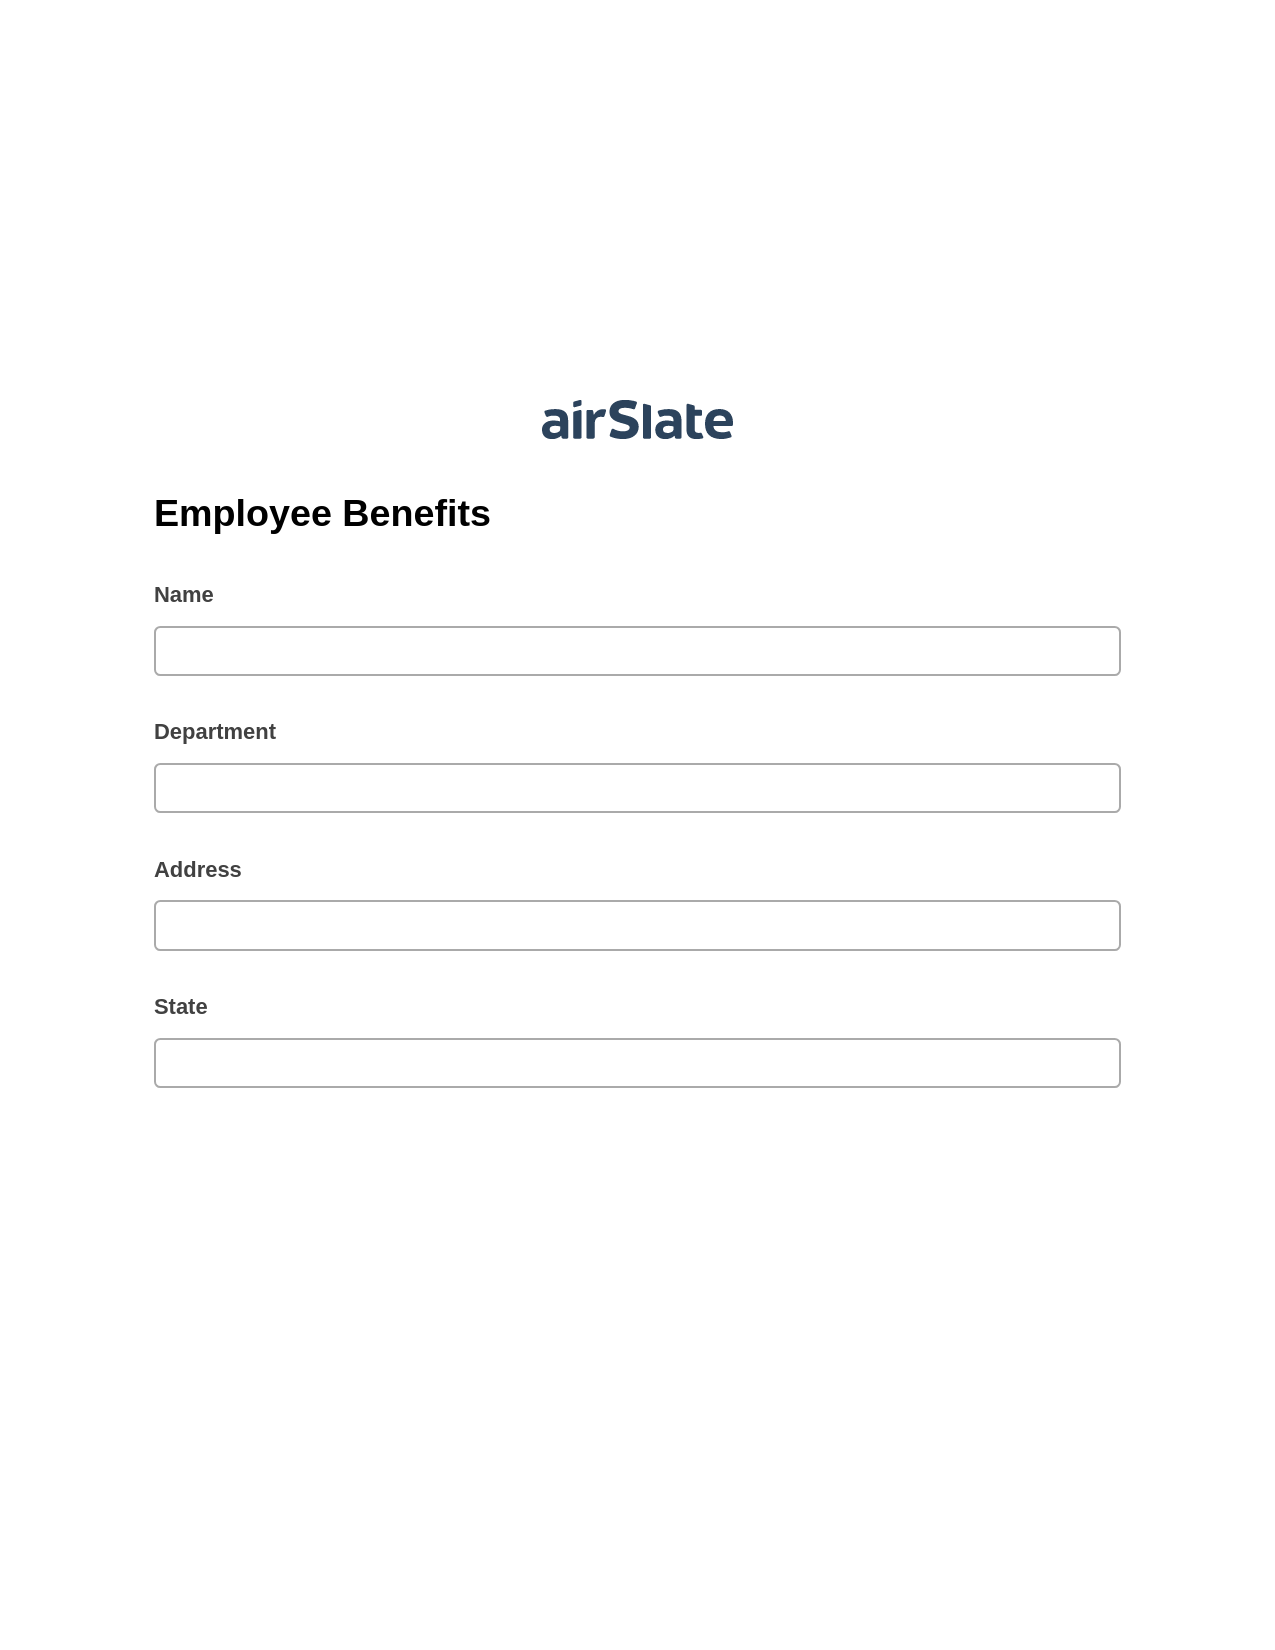 Employee Benefits Pre-fill Dropdowns from CSV File Bot, Set Signature Type Bot, Archive to SharePoint Folder Bot